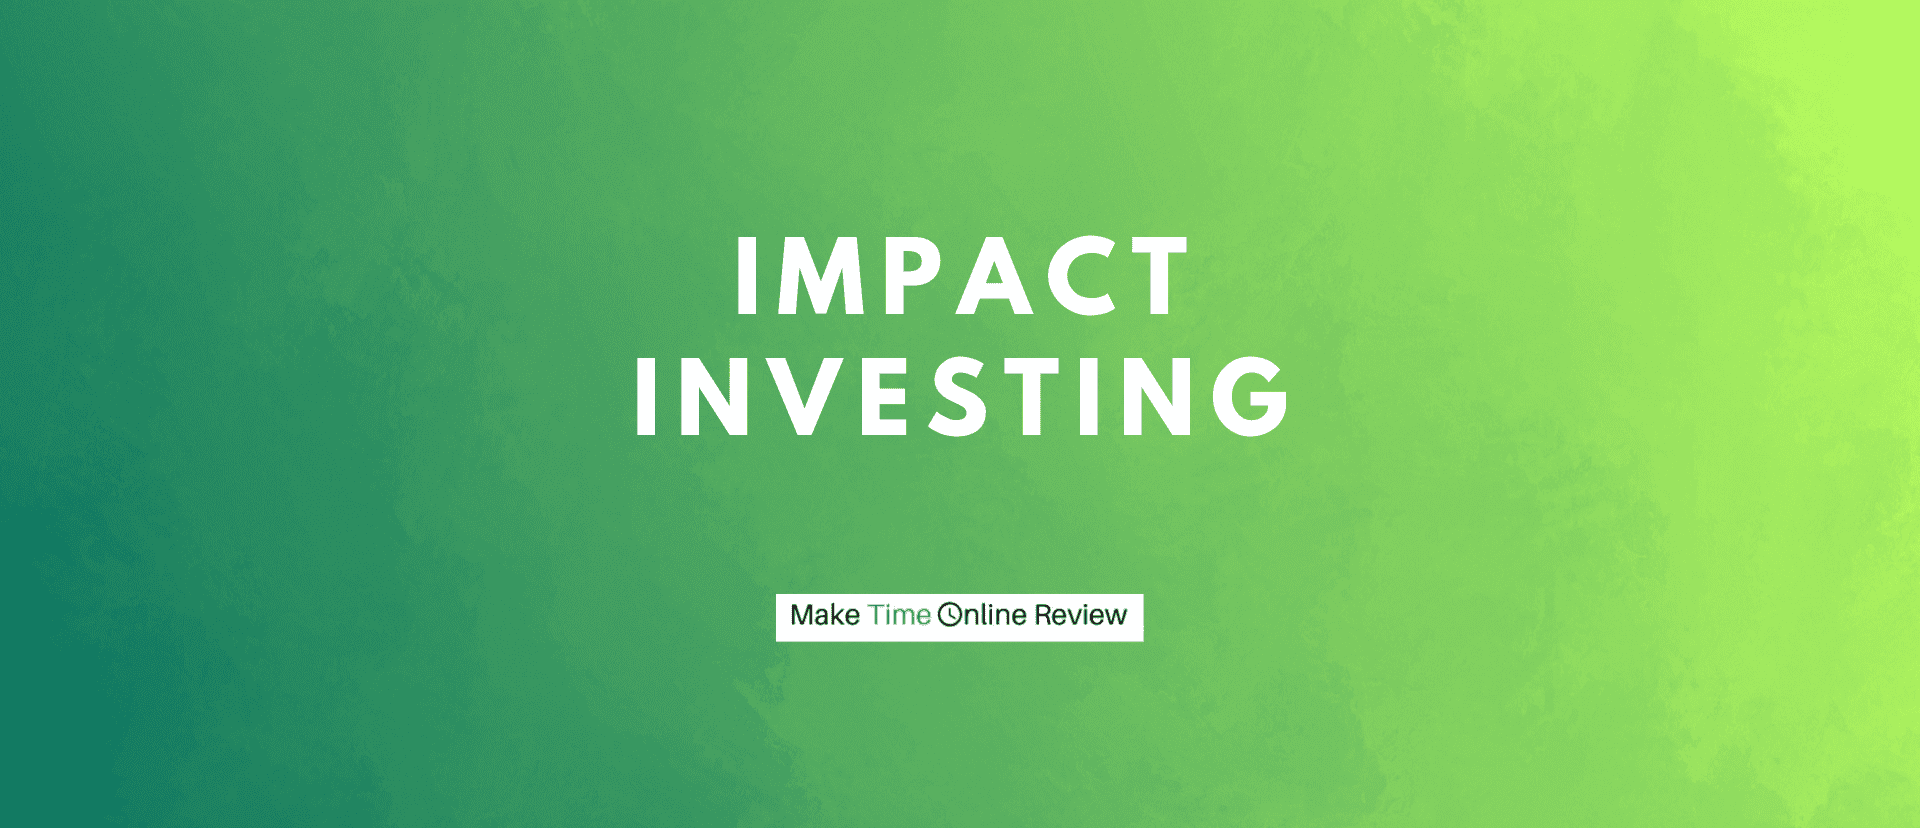 Impact Investing featured image